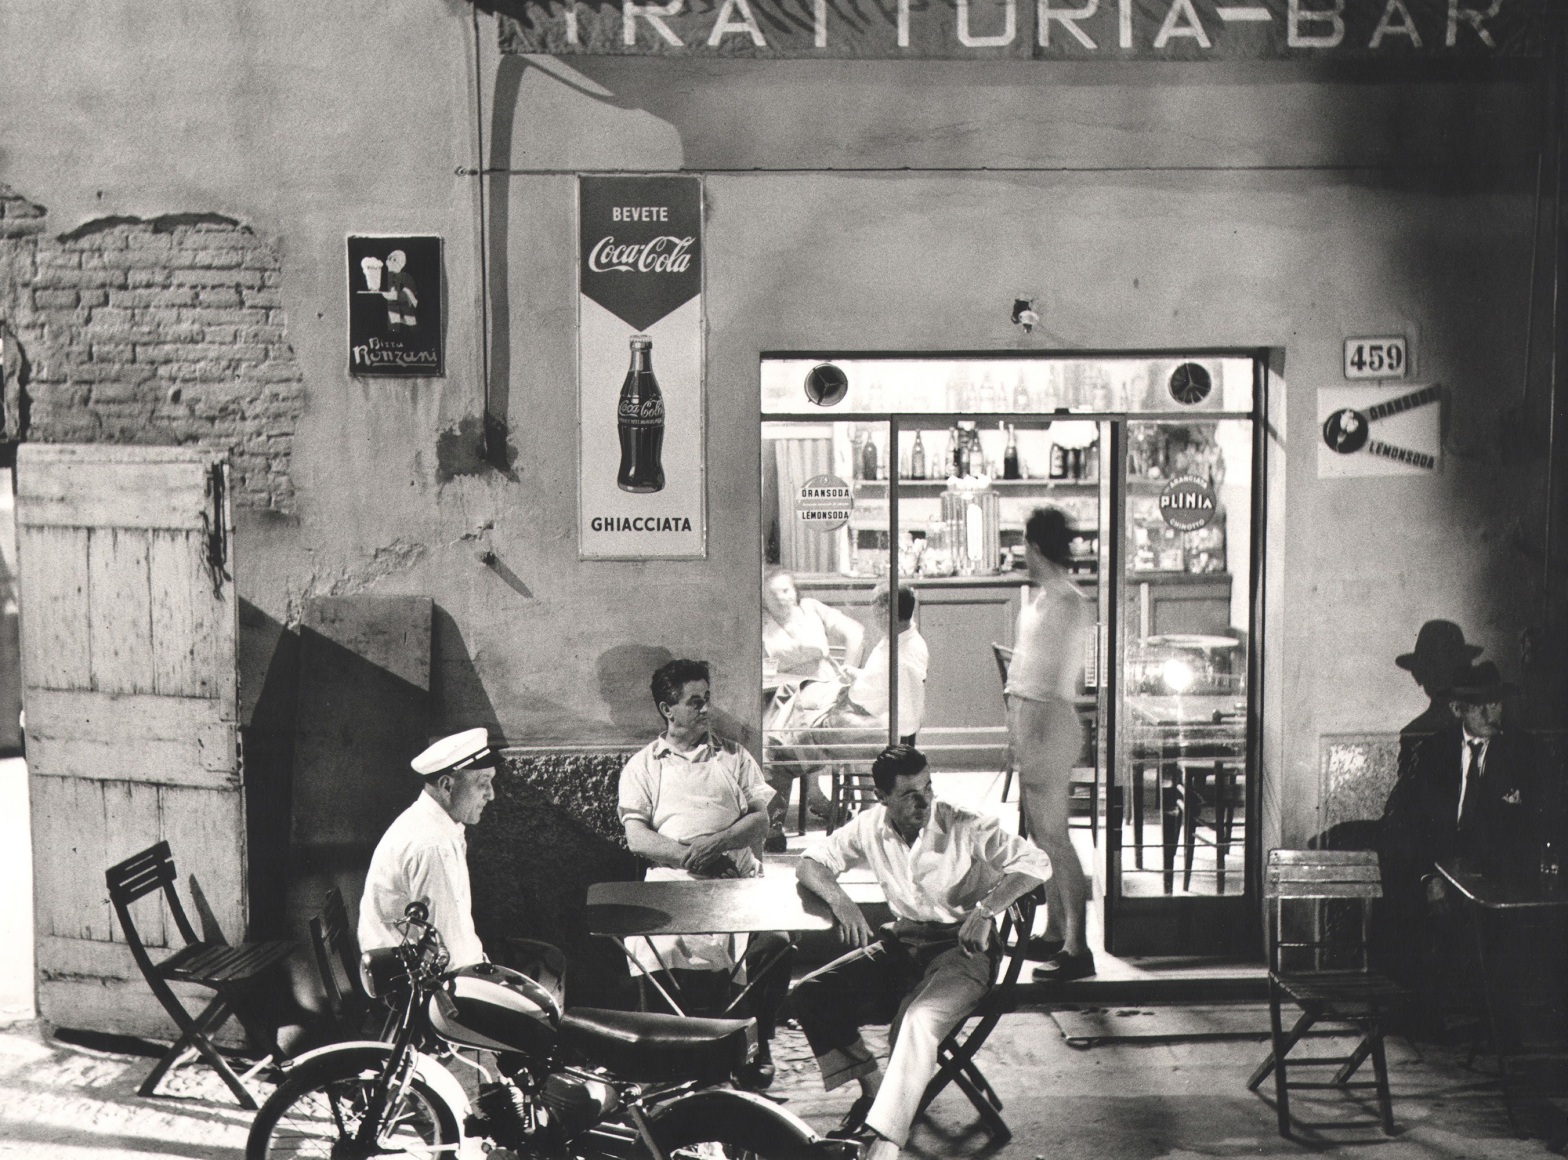 Nino Migliori, Gente dell'Emilia, ​1959. Men seated at a table outside a building marked &quot;Trattoria Bar&quot;. Soda advertisements appear on the walls and windows.